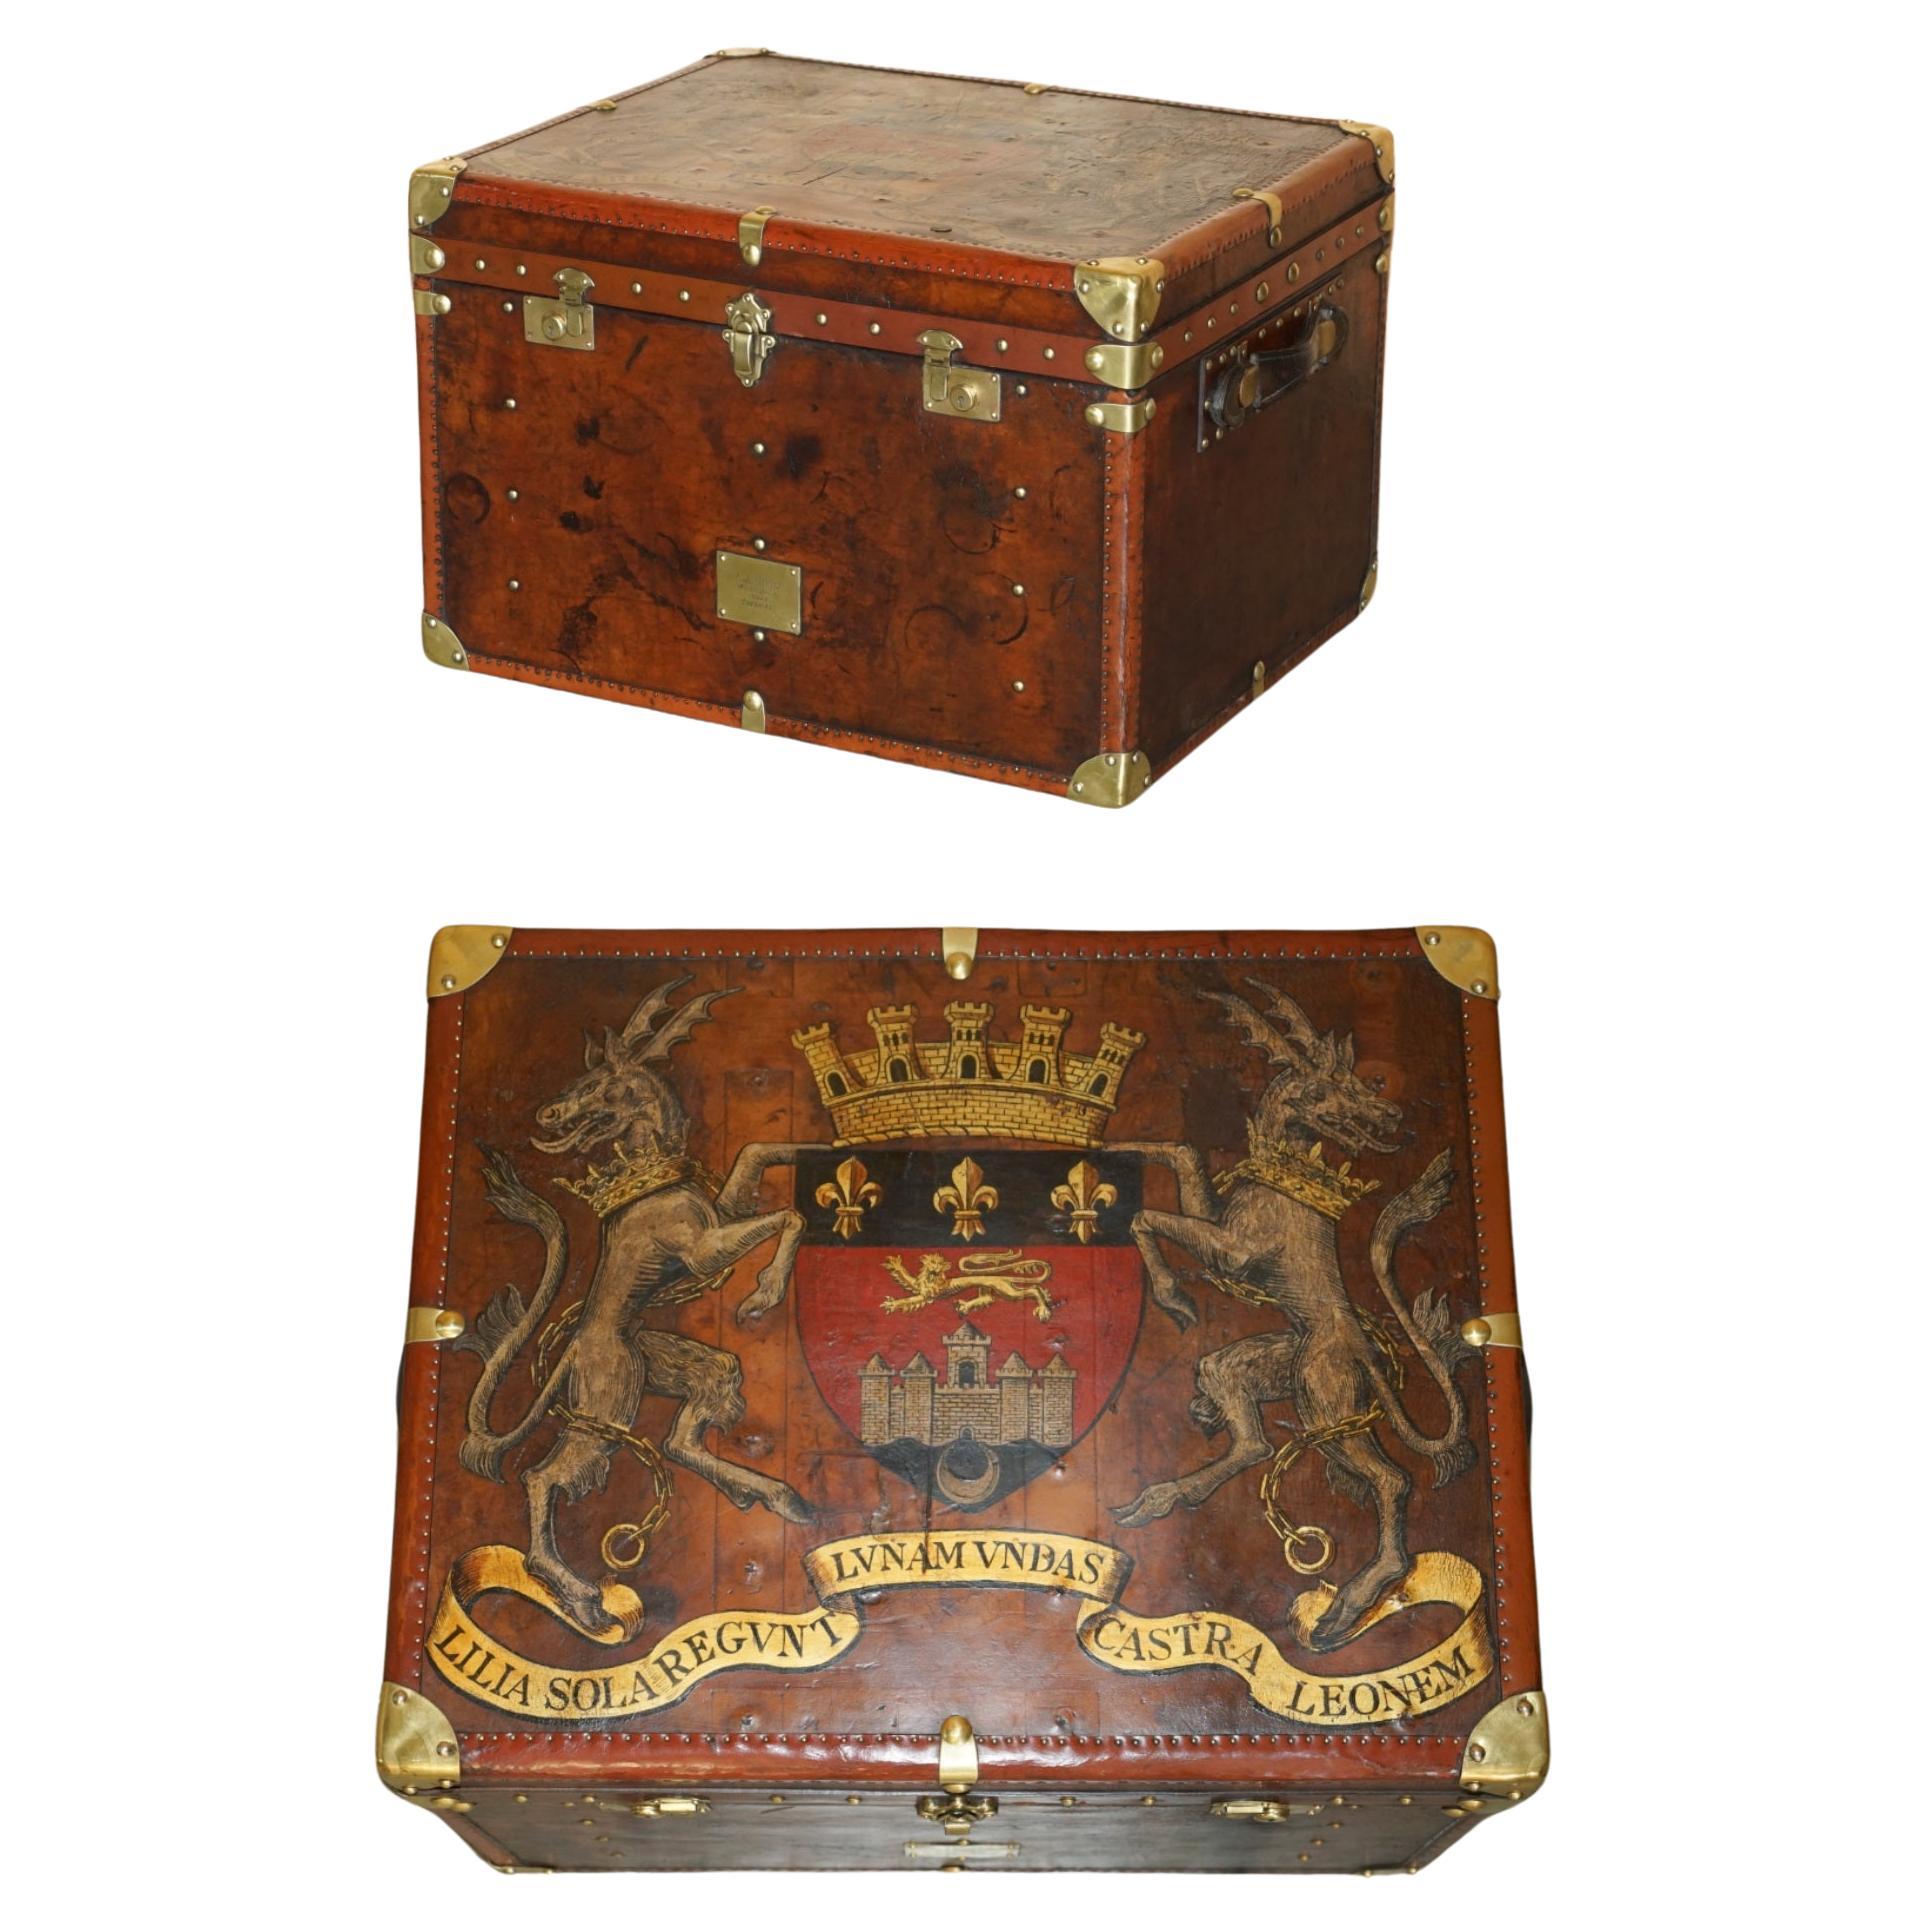 ONE OF A KiND ANTIQUE BROWN LEATHER STEAMER TRUNK WITH ARMORIAL COAT OF ARMS For Sale